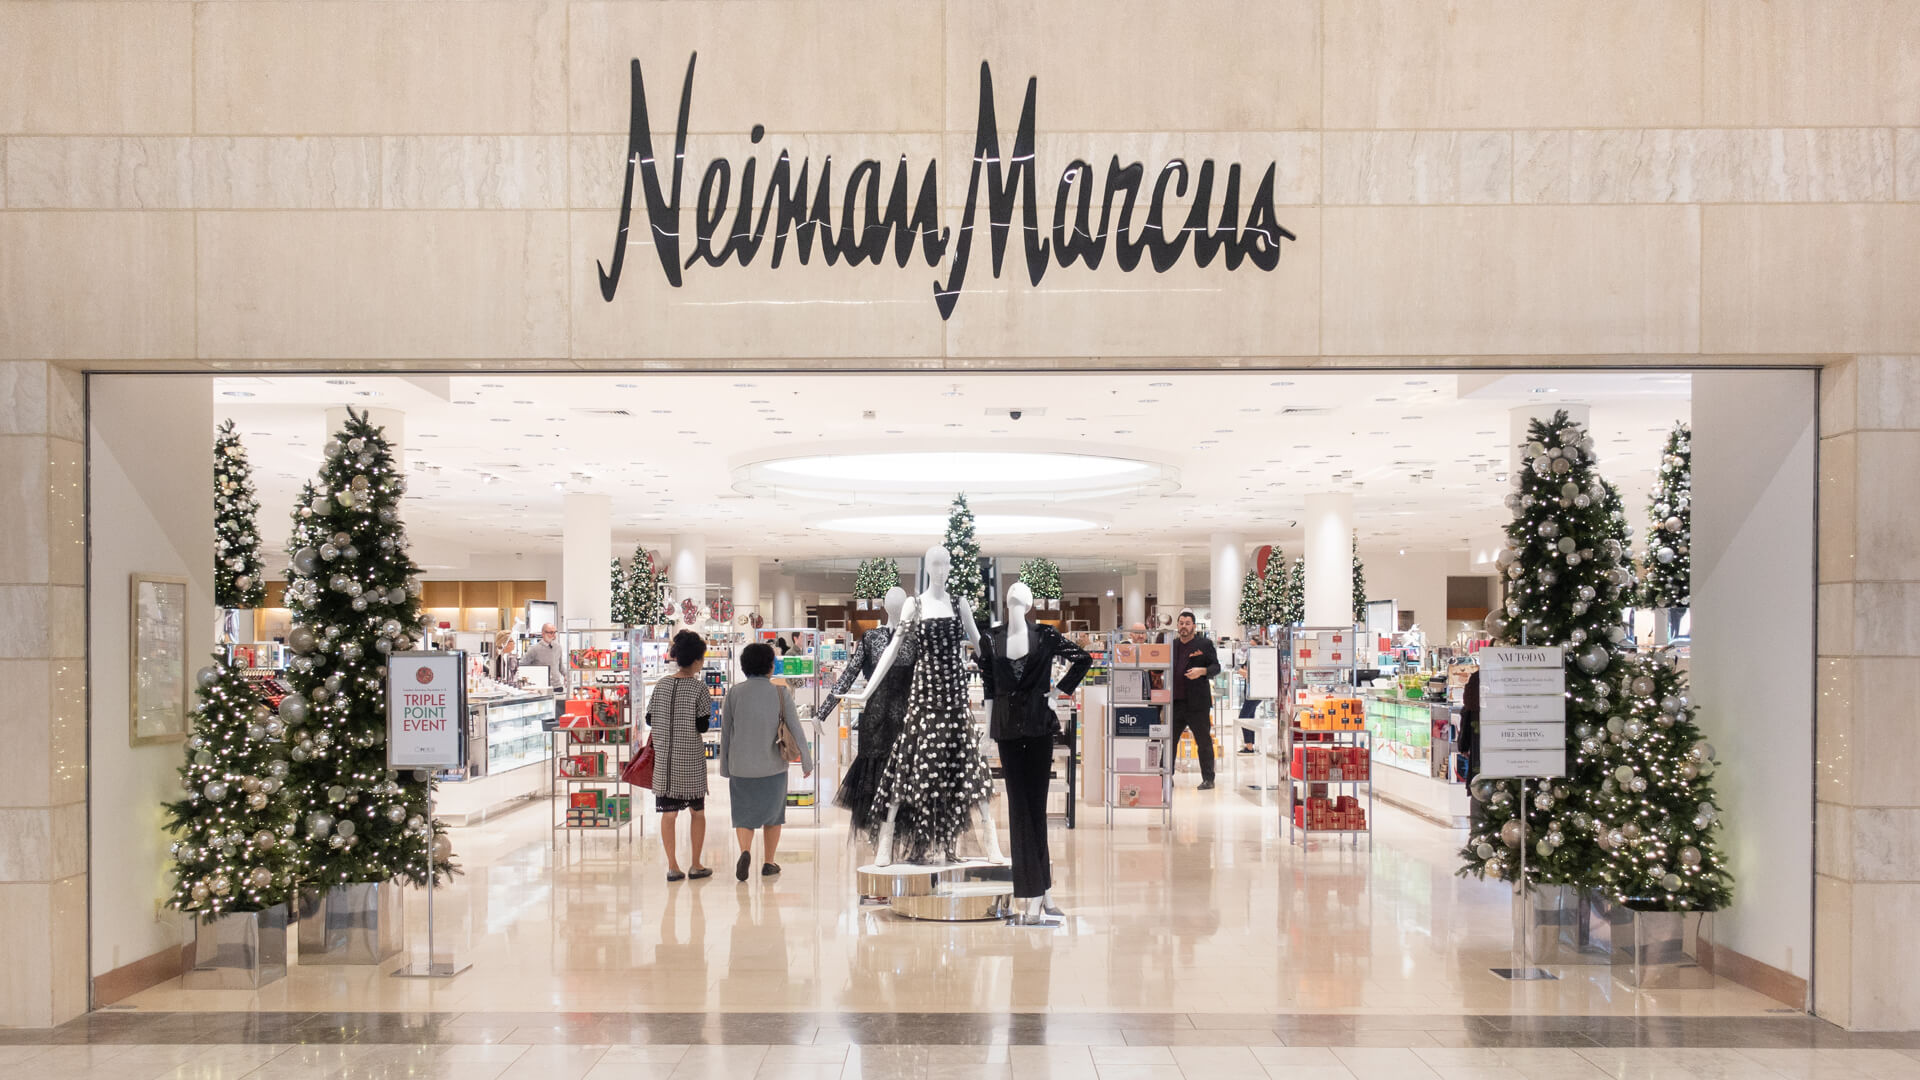 10 Craziest Things for Sale in the Neiman Marcus Christmas Book